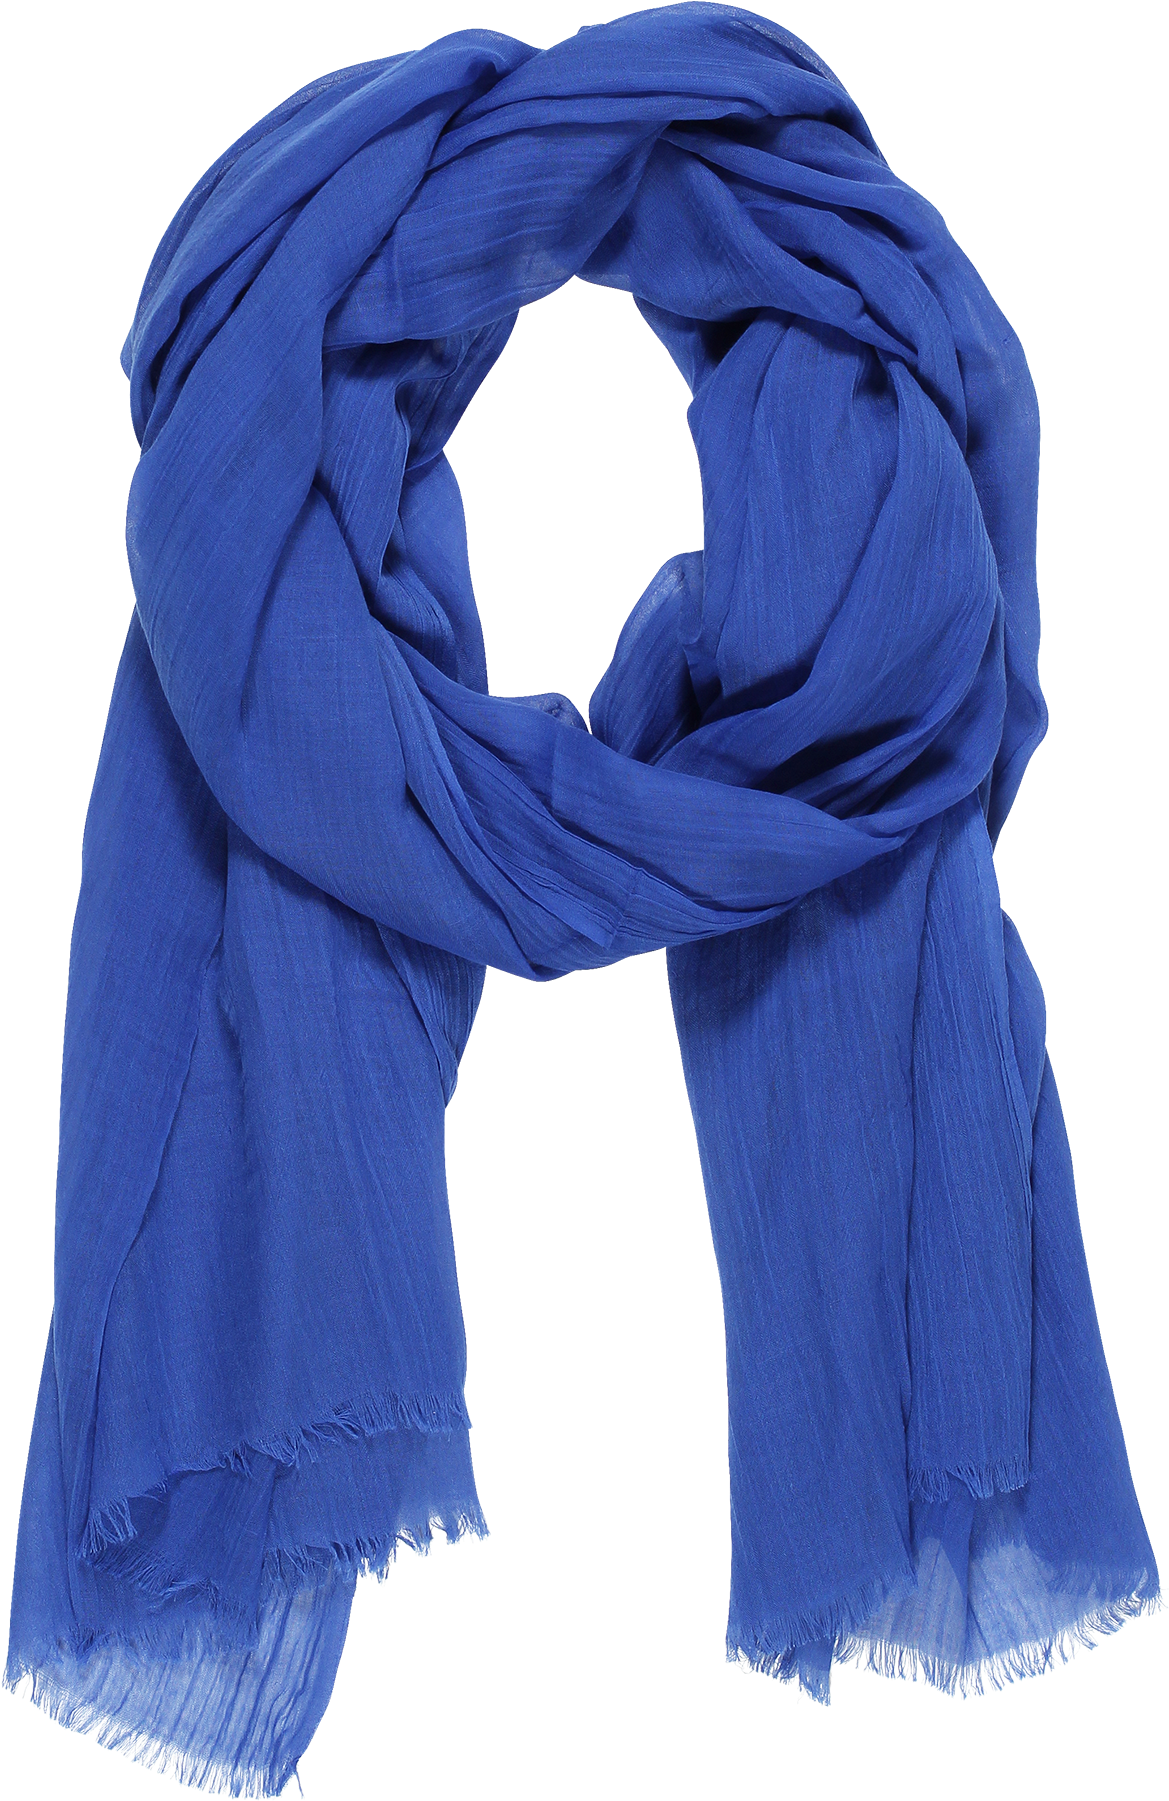 Blue Linen Scarf Isolated